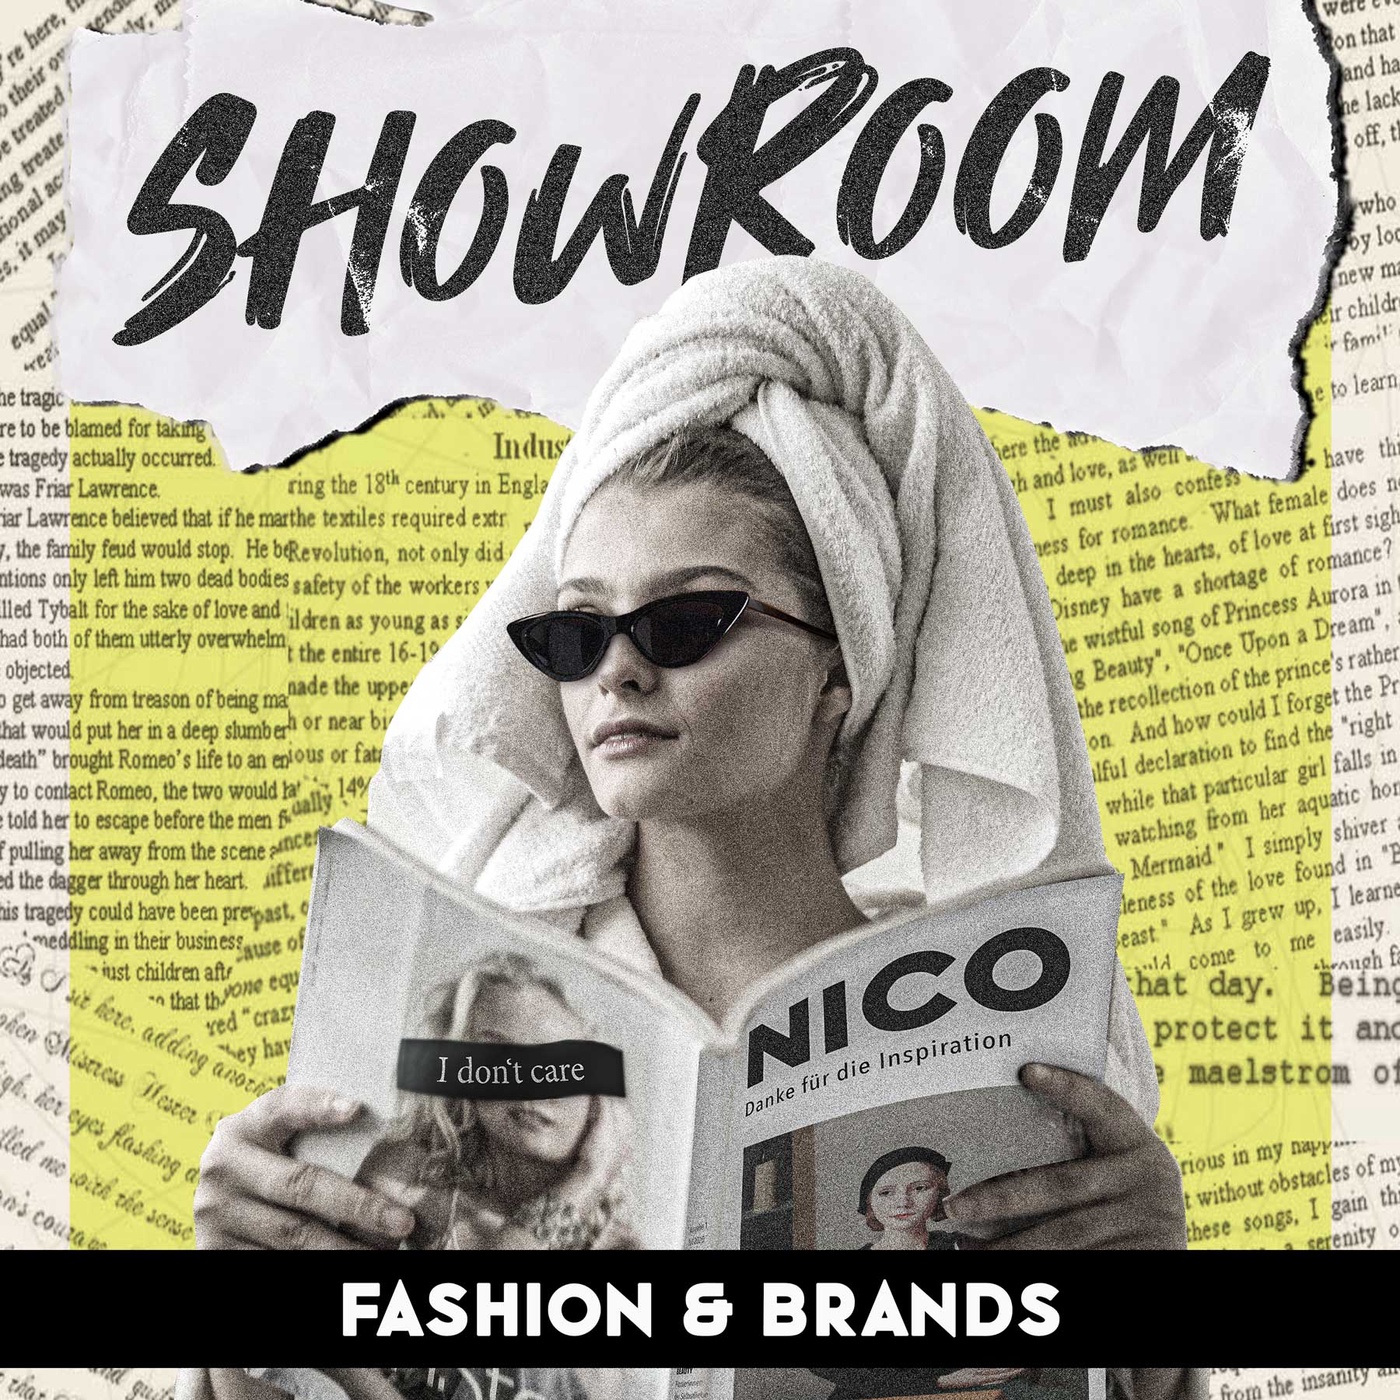 Showroom - Fashion, Business and Brands